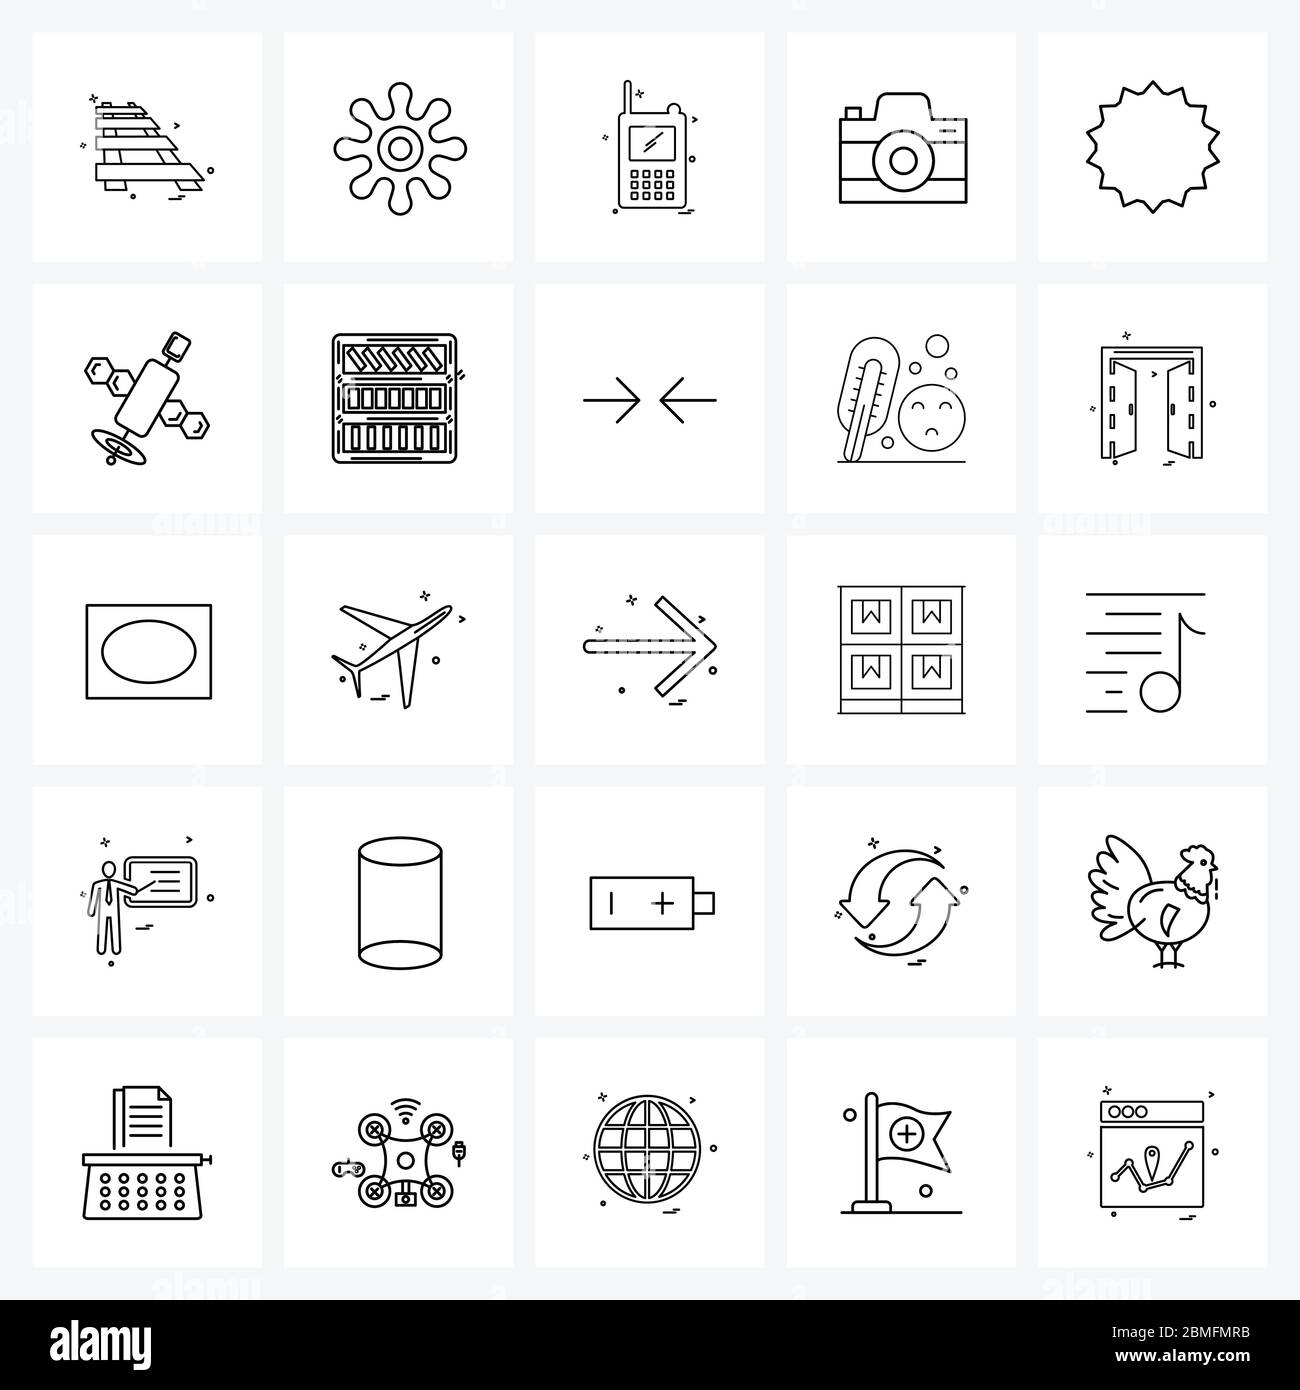 Set of 25 UI Icons and symbols for photo, image, law, digital, security Vector Illustration Stock Vector